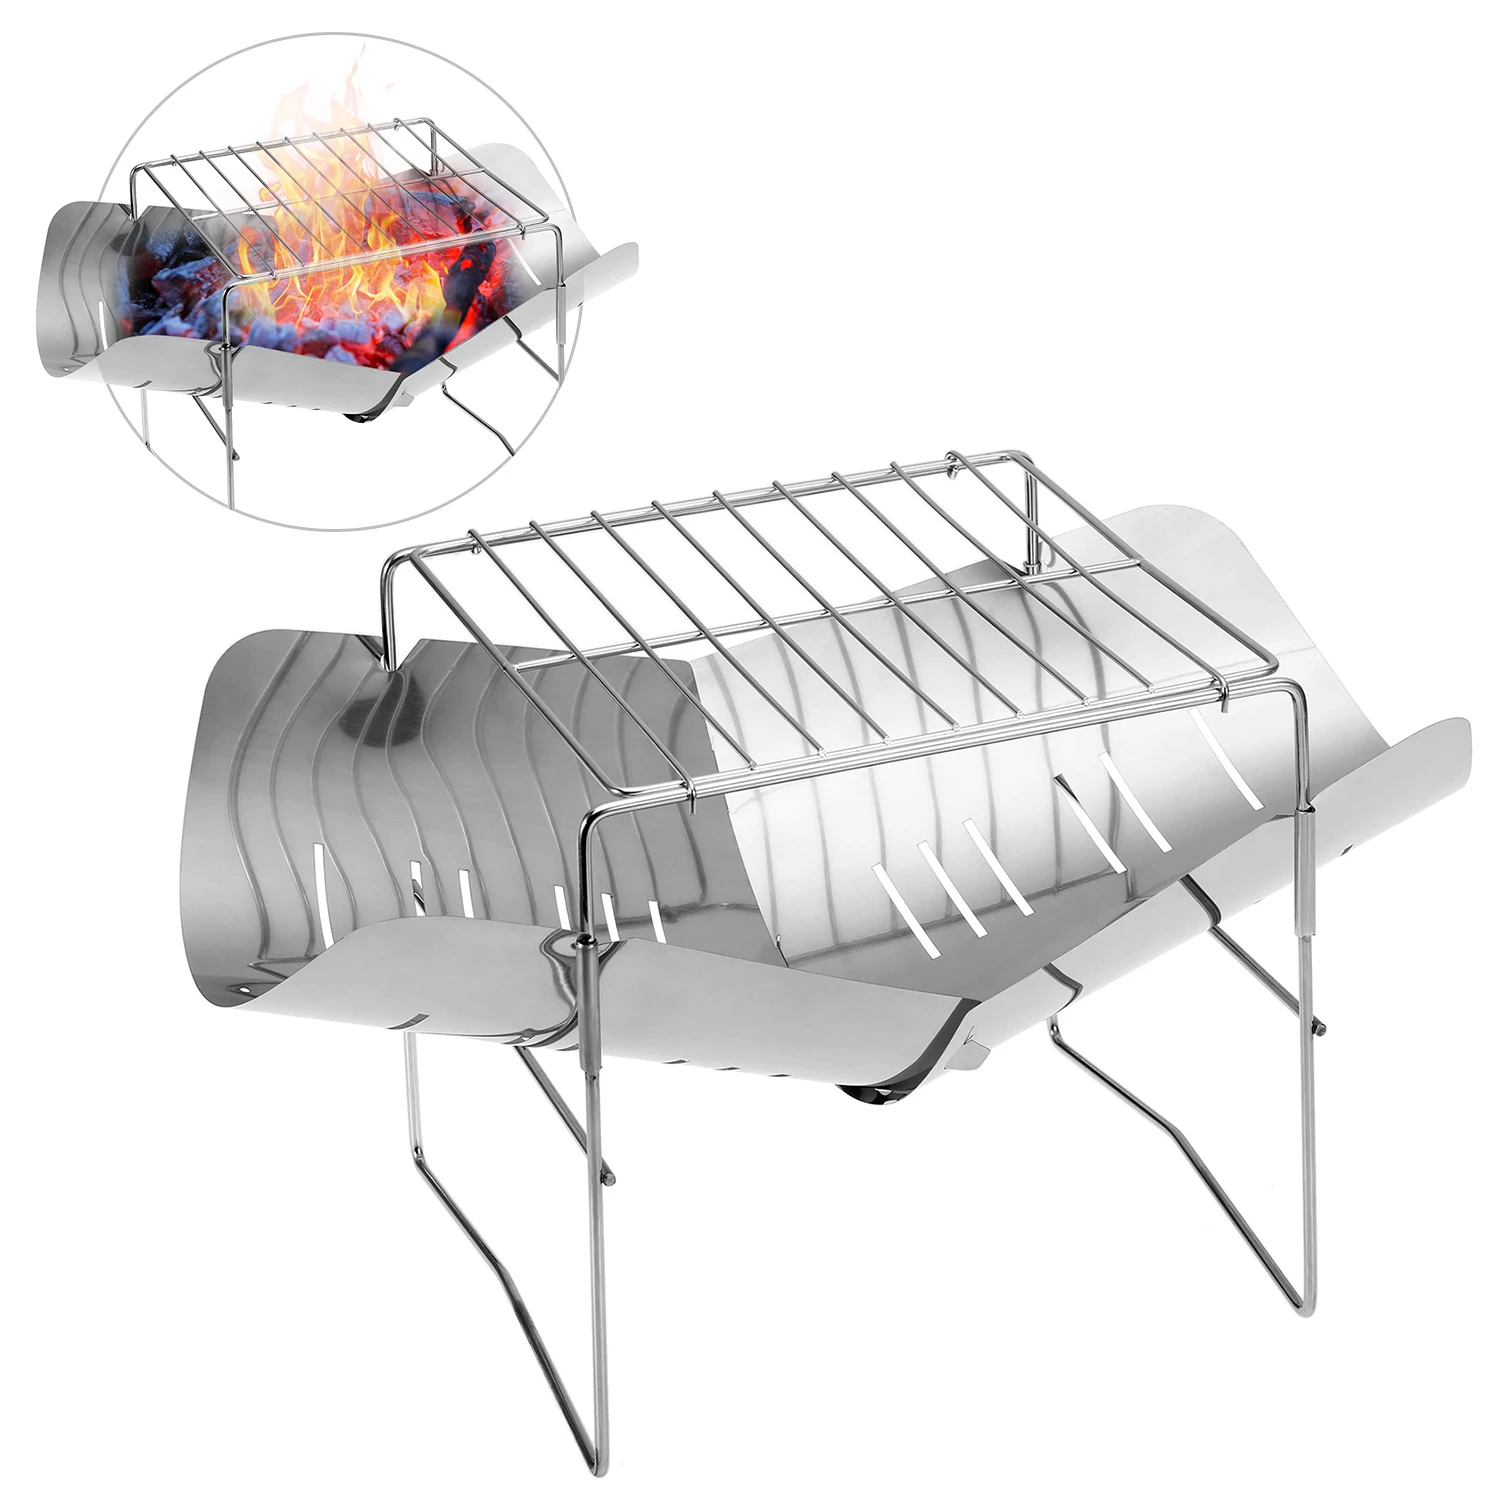 Stainless Steel Barbecue Grill Camping Folding Portable Outdoor BBQ Grill